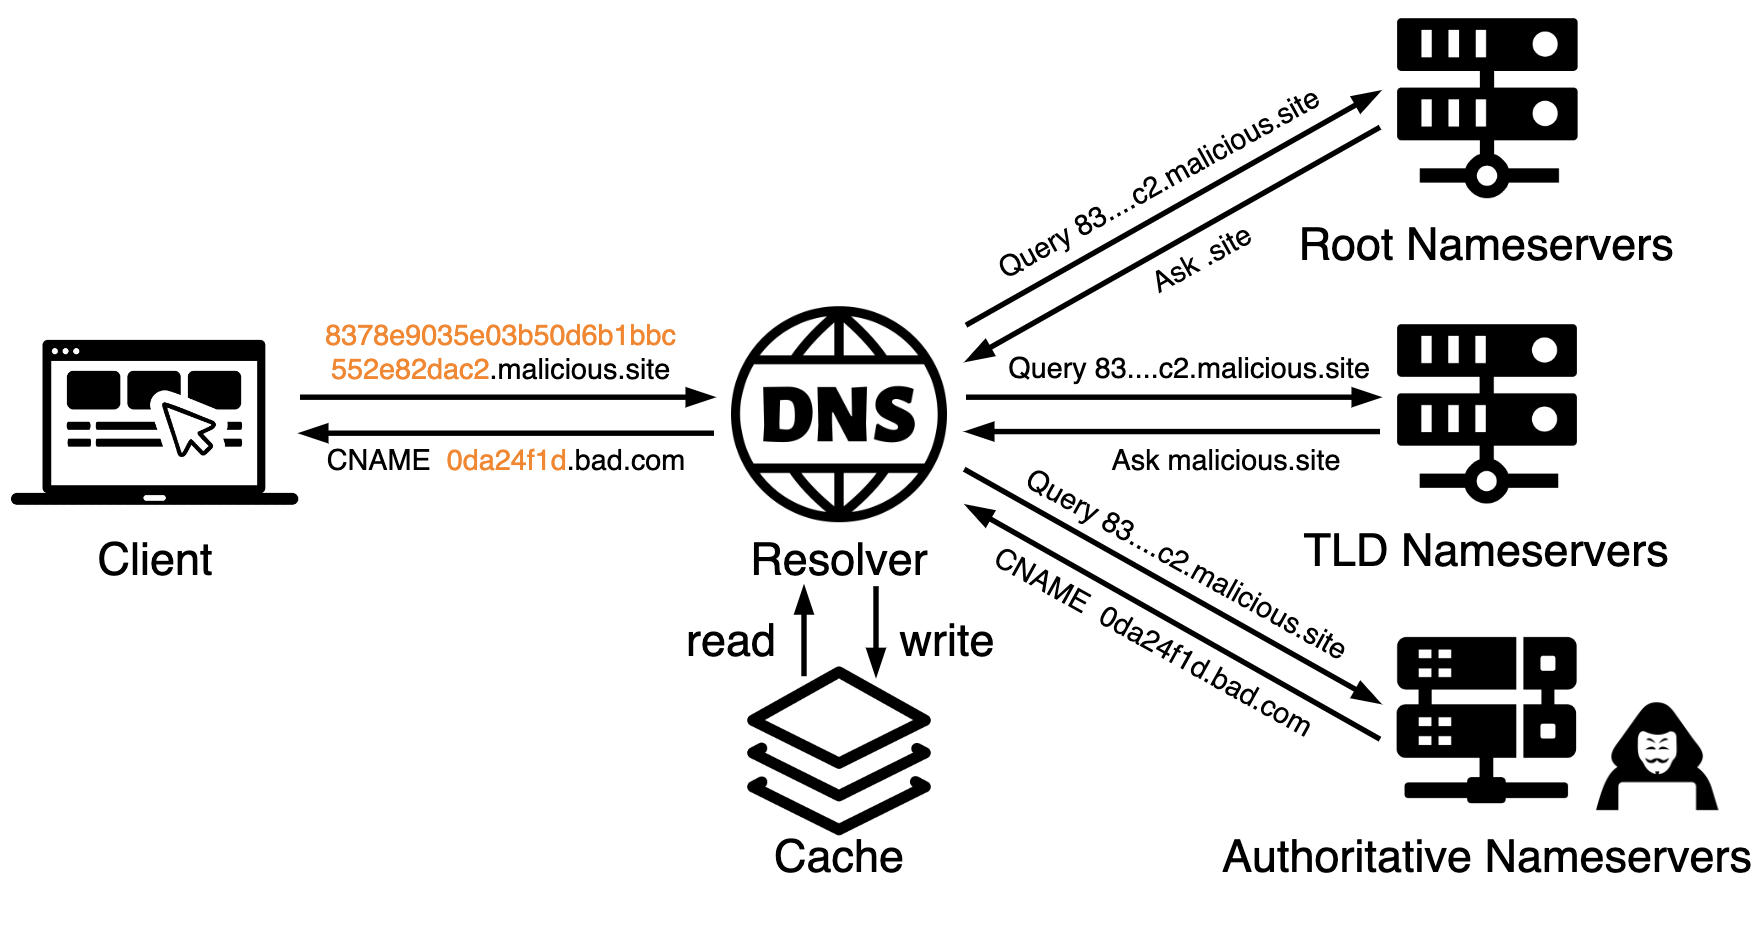 Image 1 is a diagram of how data exfiltration and infiltration work with DNS tunneling. The client server communicates with the DNS resolver. Icon for read/write from the cache. From the DNS resolver the addresses communicate with the root name servers, the top level domain name servers and the authoritative name servers. 